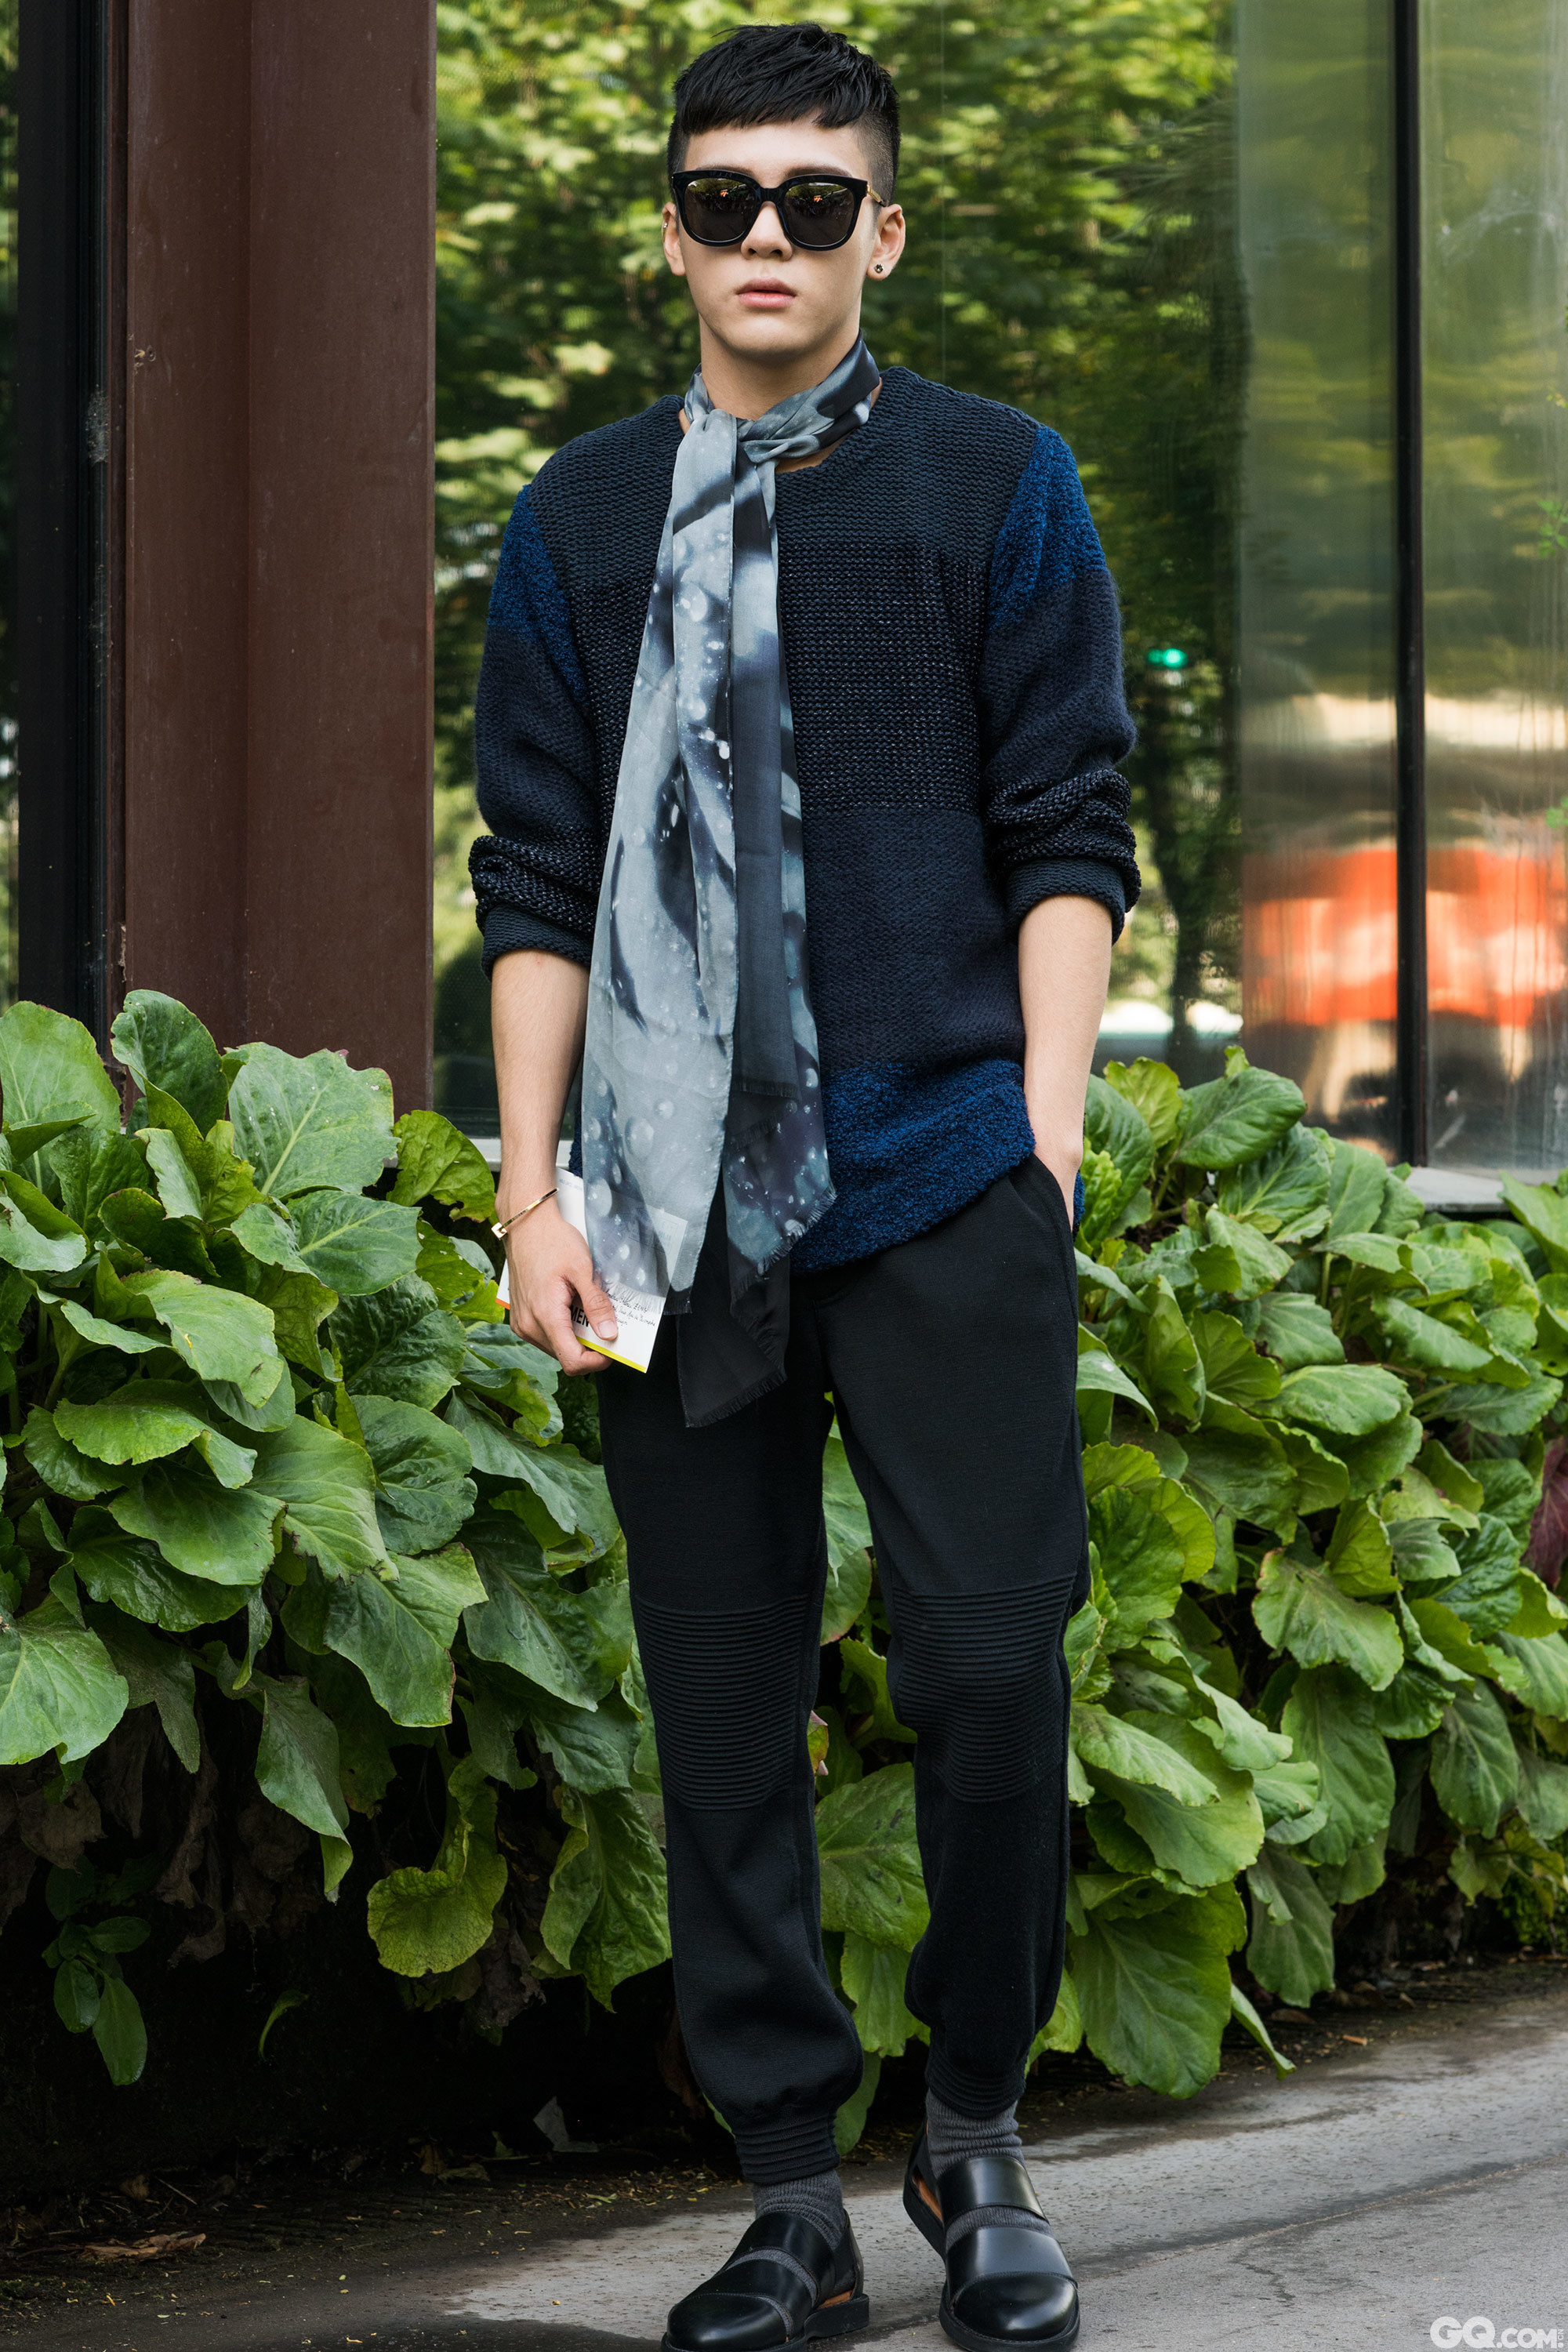 All look: Issey Miyake
Shoes: Cos

Inspiration: It’s very warm so I wanted to wear light fabrics
（今天非常热所以我想穿轻薄面料的衣服）